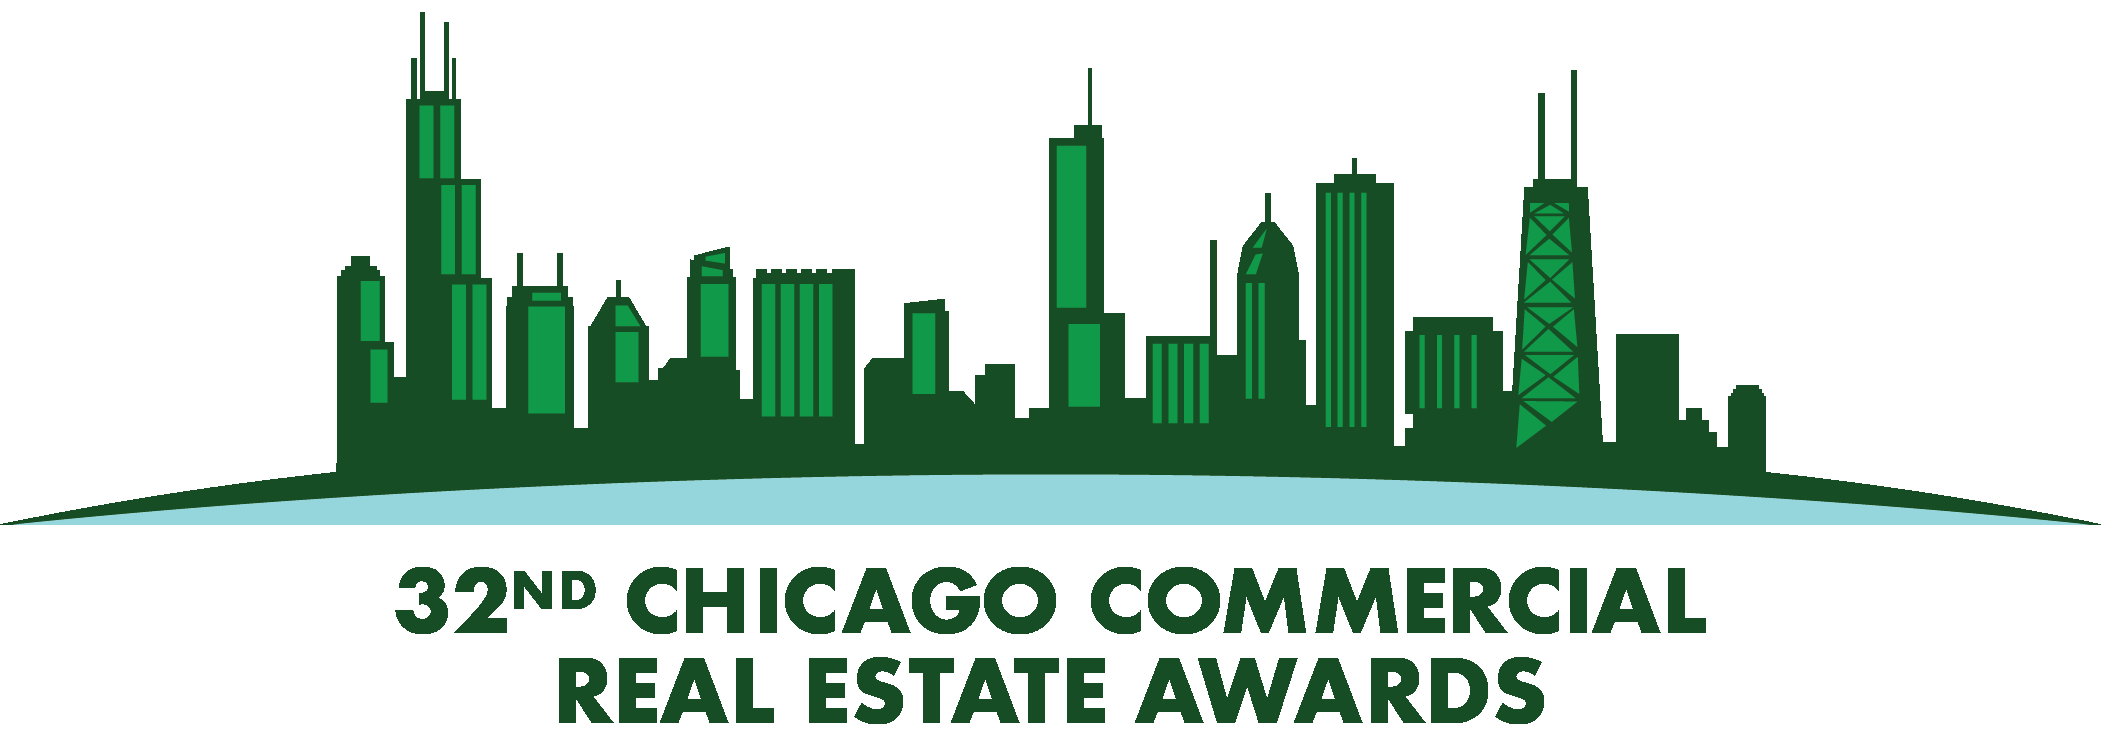 32nd Annual Chicago Commercial Real Estate Awards